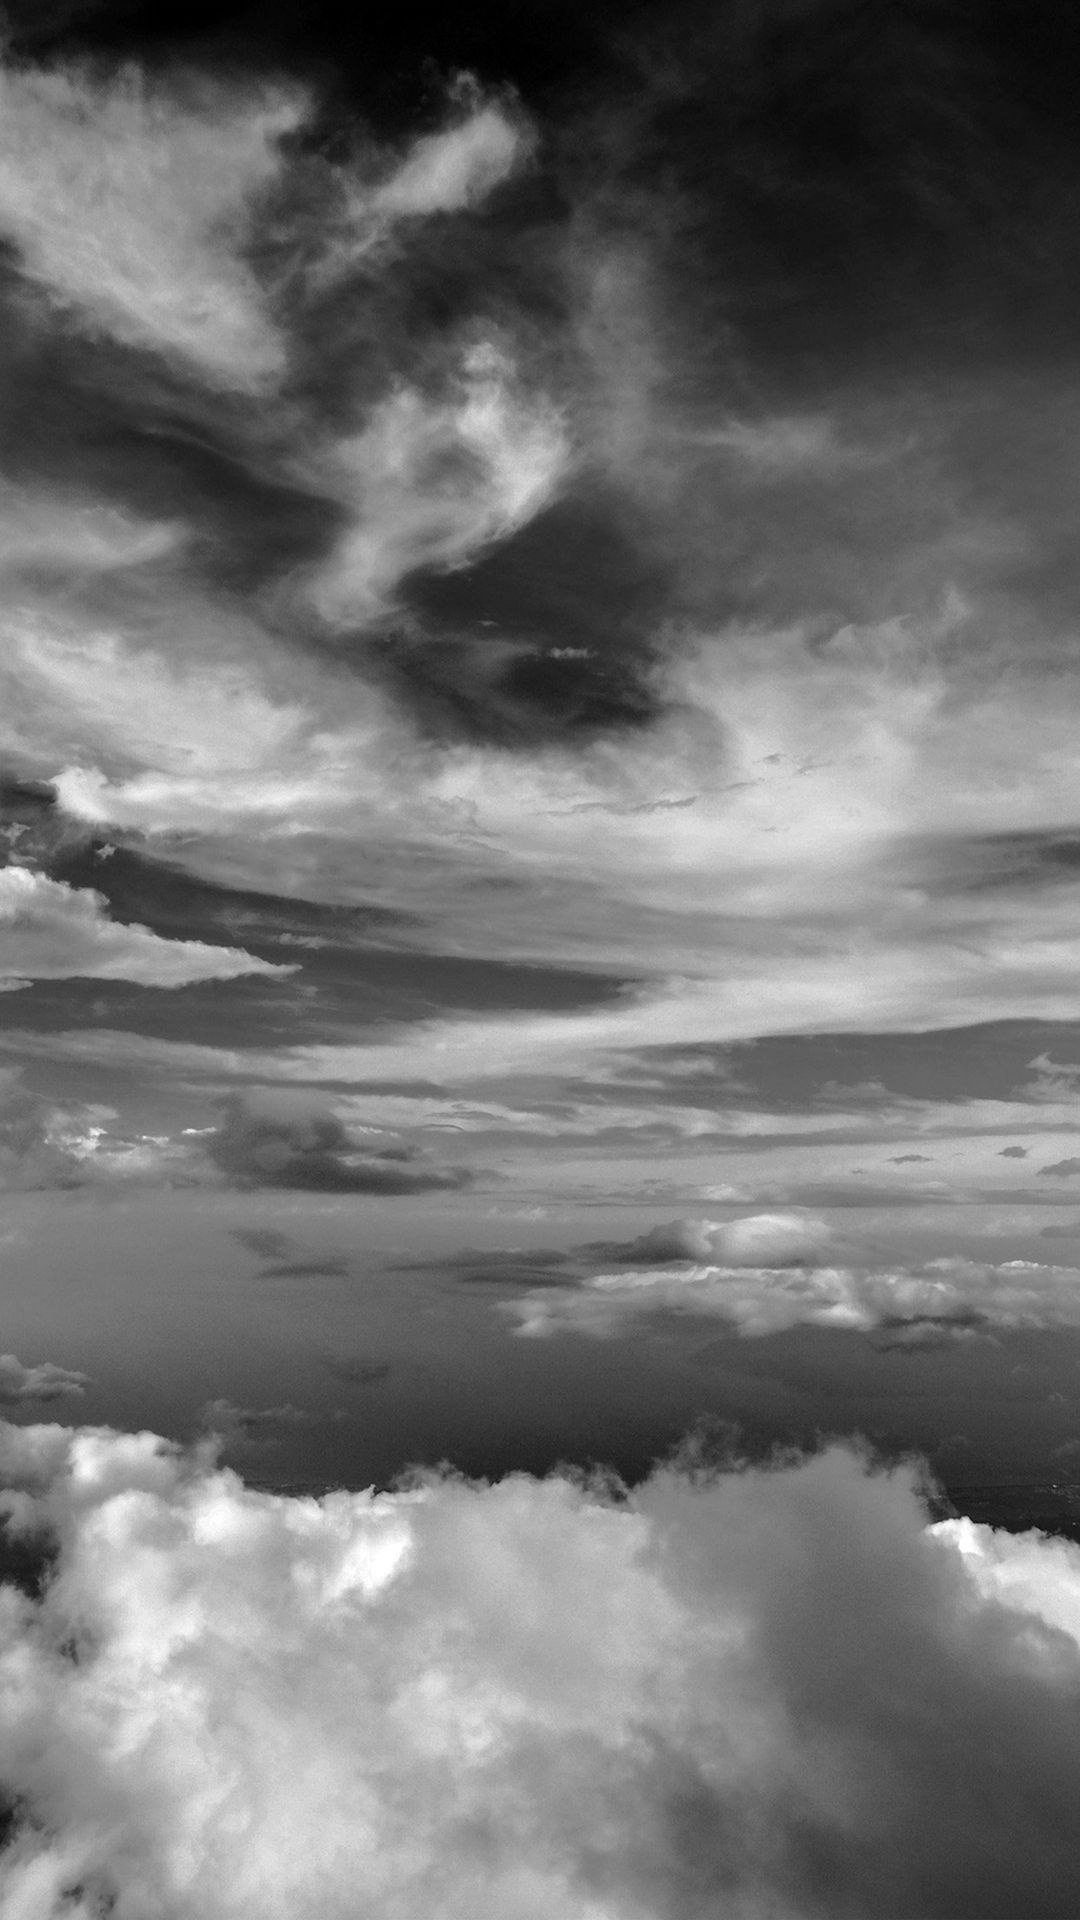 Gray Cloudy Sky: Black and white, The formation of clouds, Falling precipitation, Atmospheric layer. 1080x1920 Full HD Wallpaper.